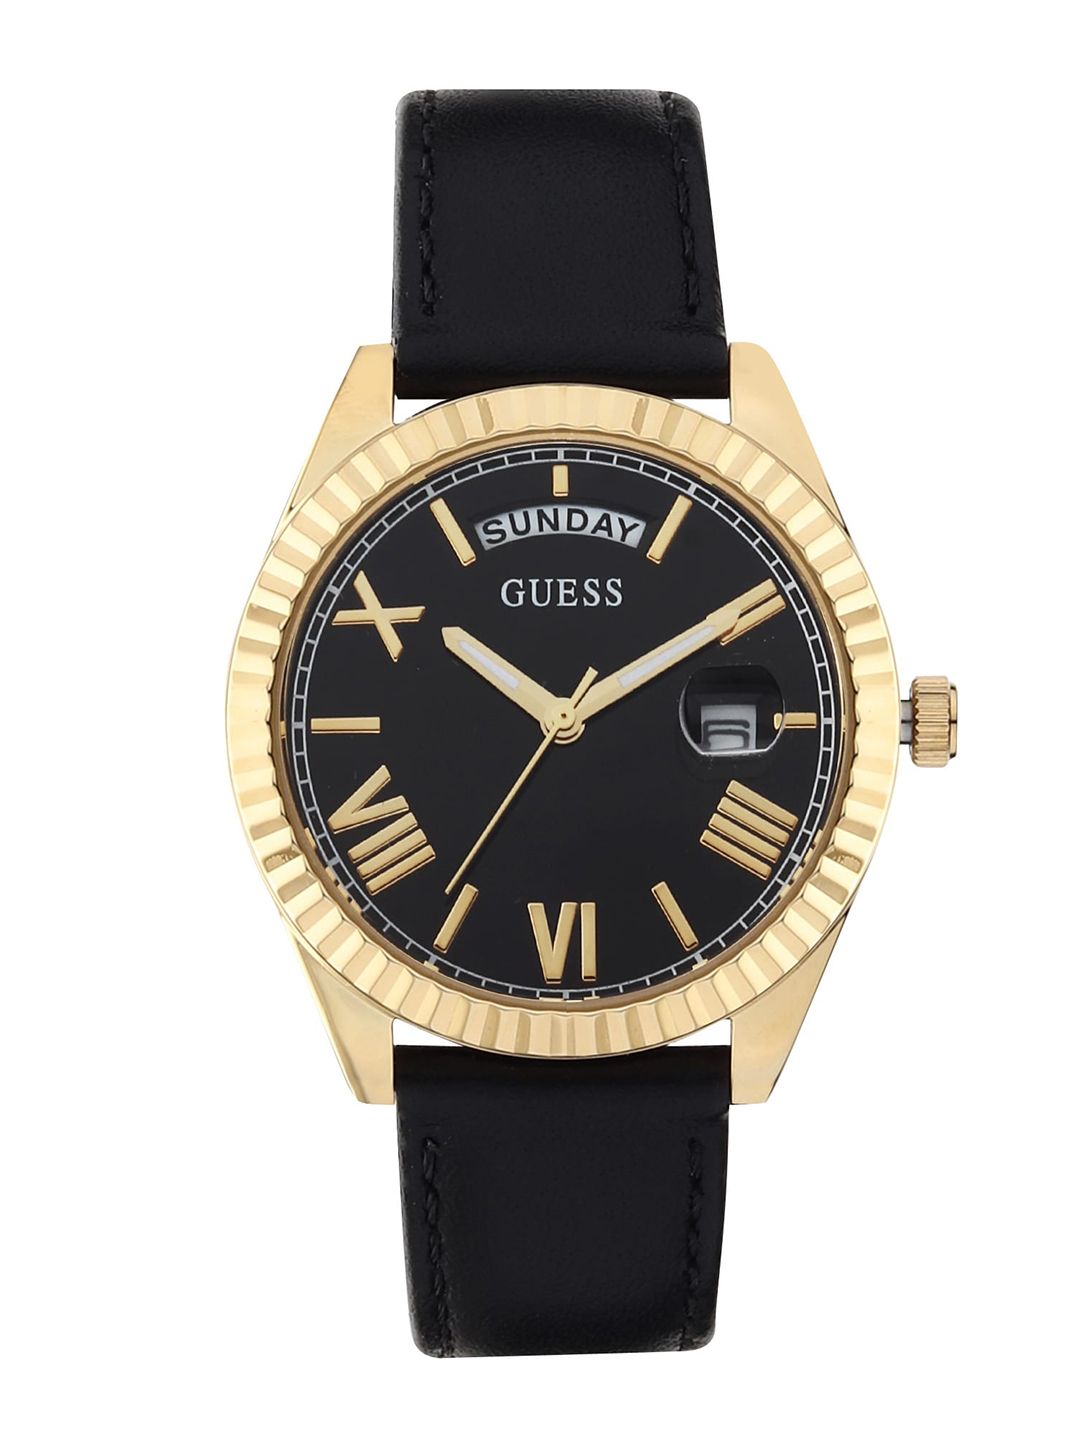 GUESS Women Gold-Toned Embellished Dial & Black Leather Straps Analogue Multi Function Watch GW0357L1 Price in India